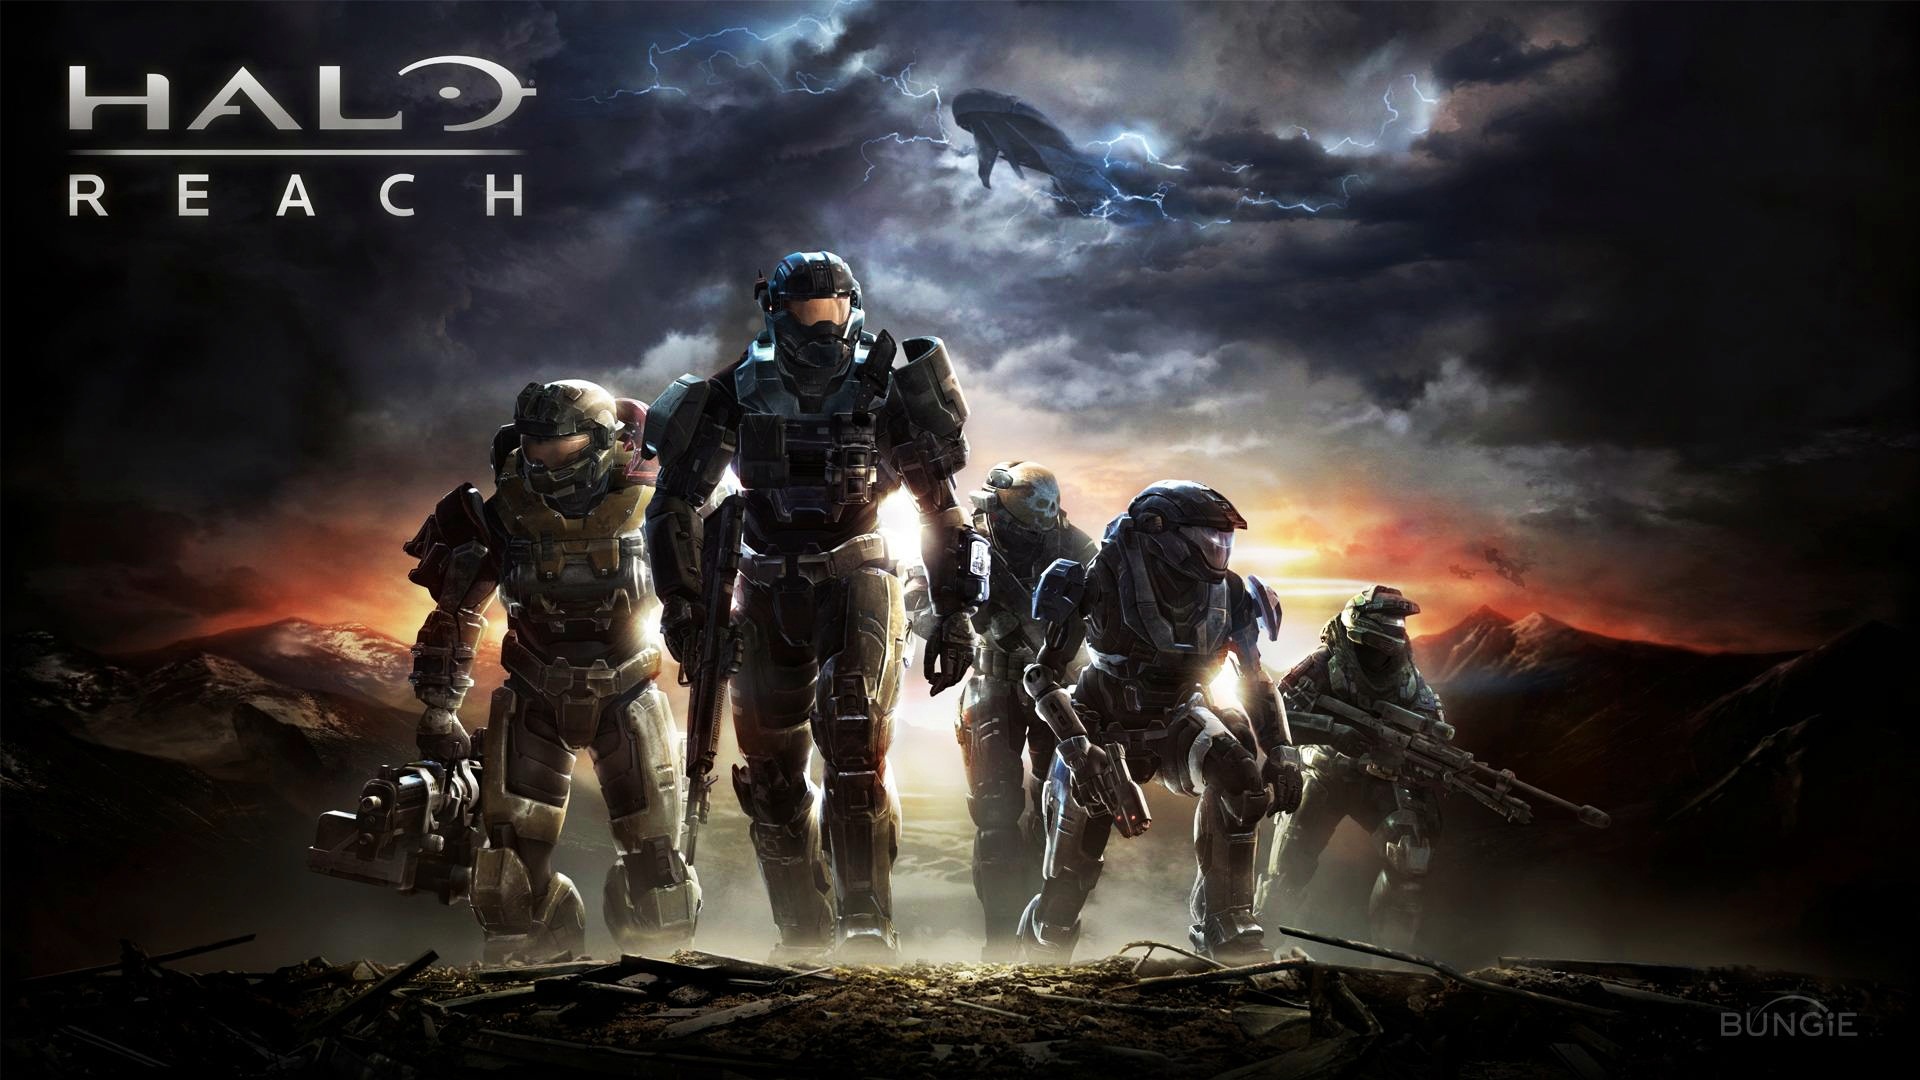 halo wallpapers hd,action adventure game,movie,adventure game,cg artwork,pc game